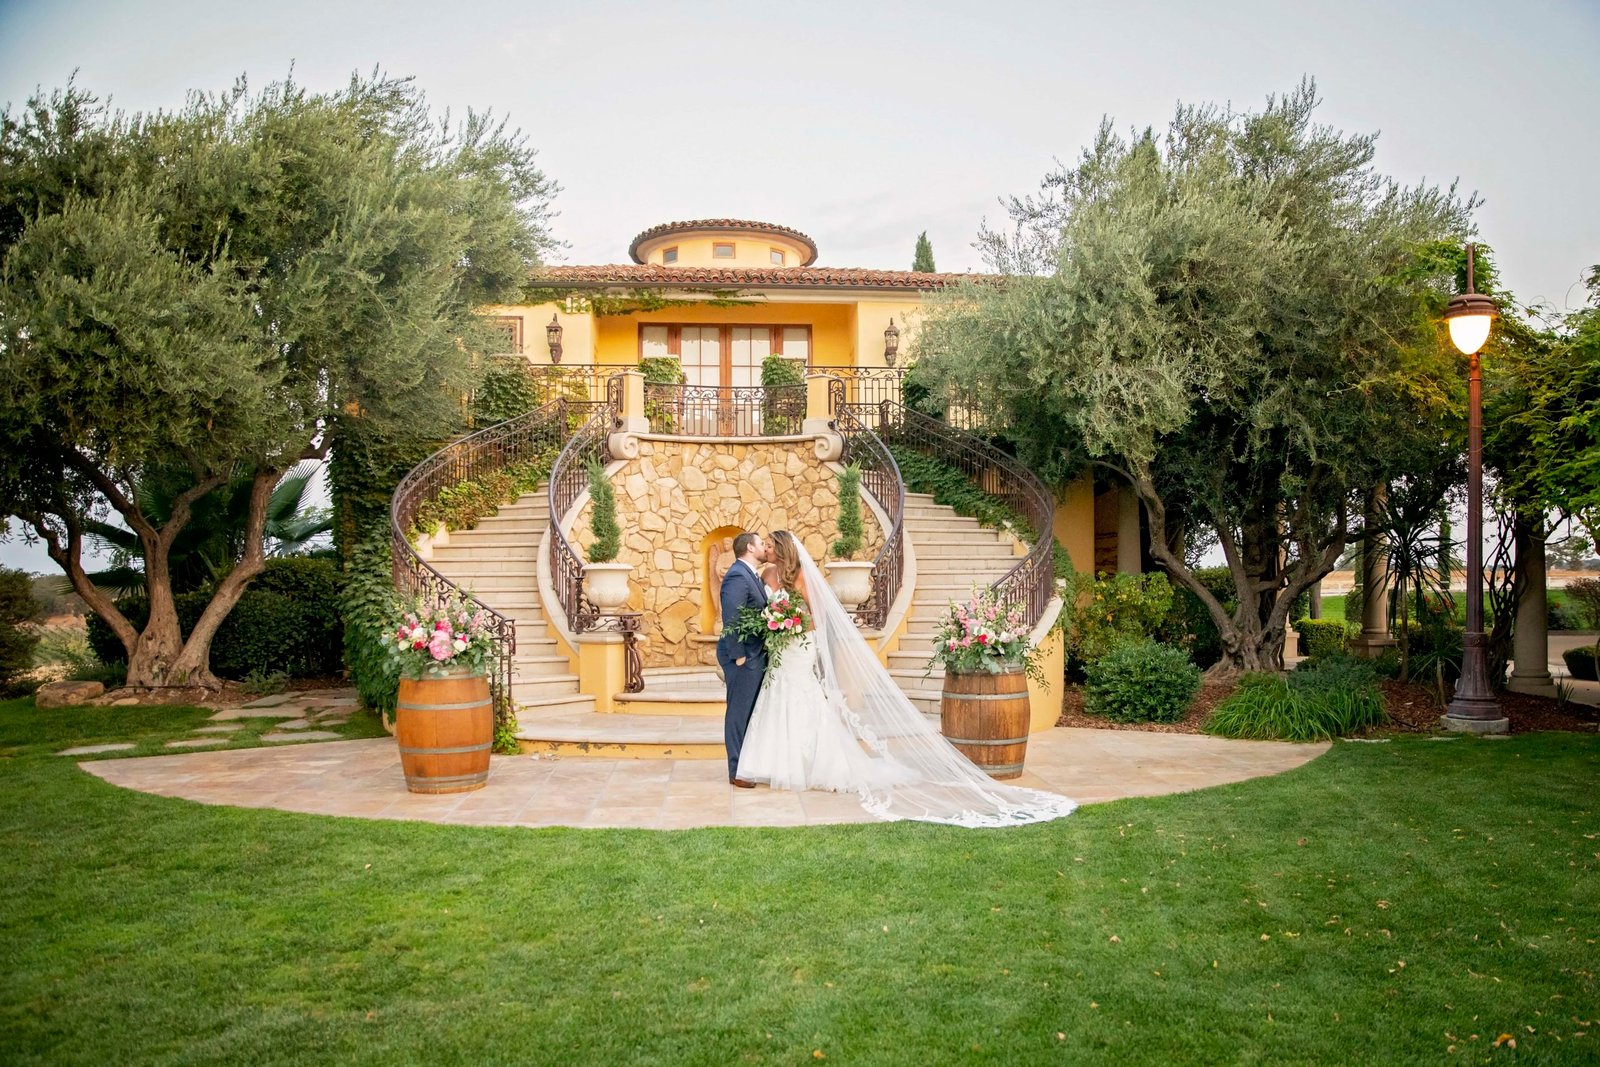 A Fairy Tale Winery Wedding at CaliPaso Winery